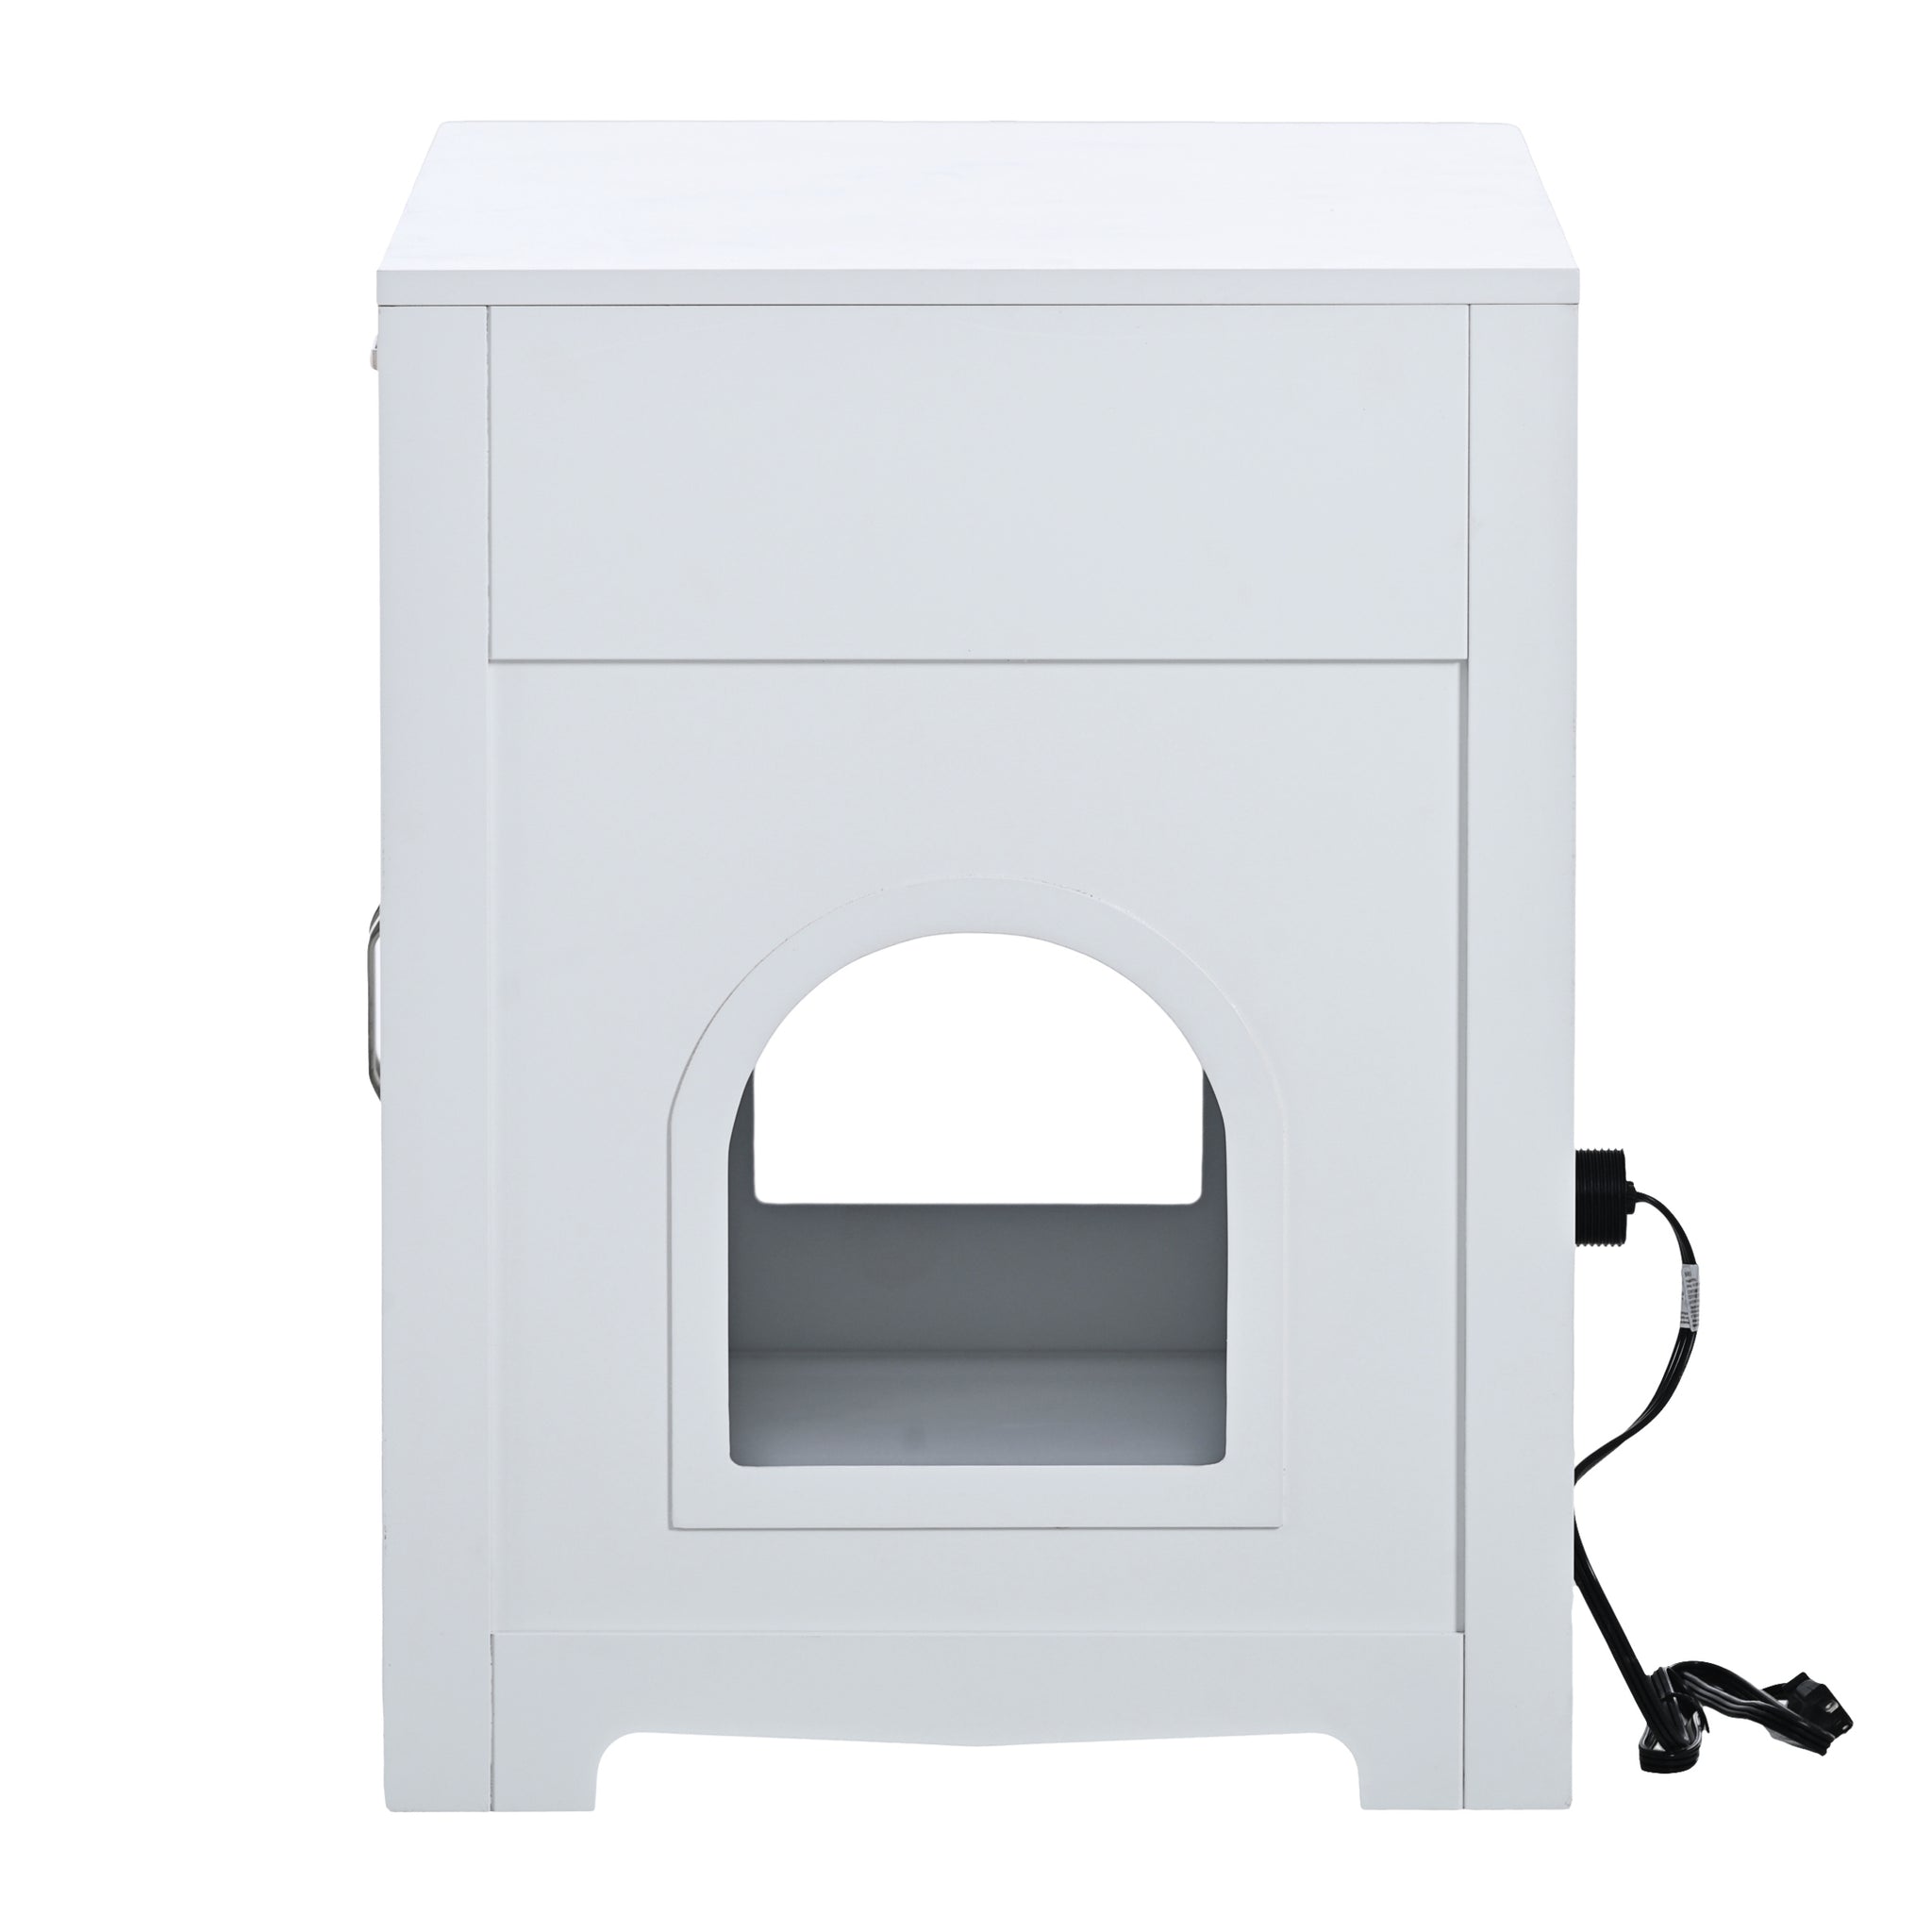 Litter Box Enclosure, Cat Litter Box Furniture with white-mdf